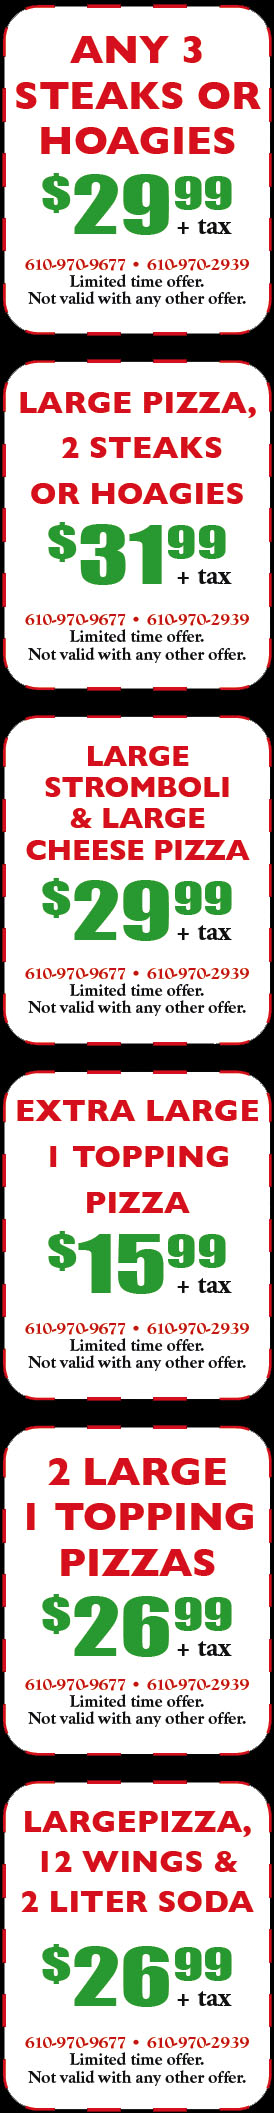 argento's pizza pottstown pa mobile coupons